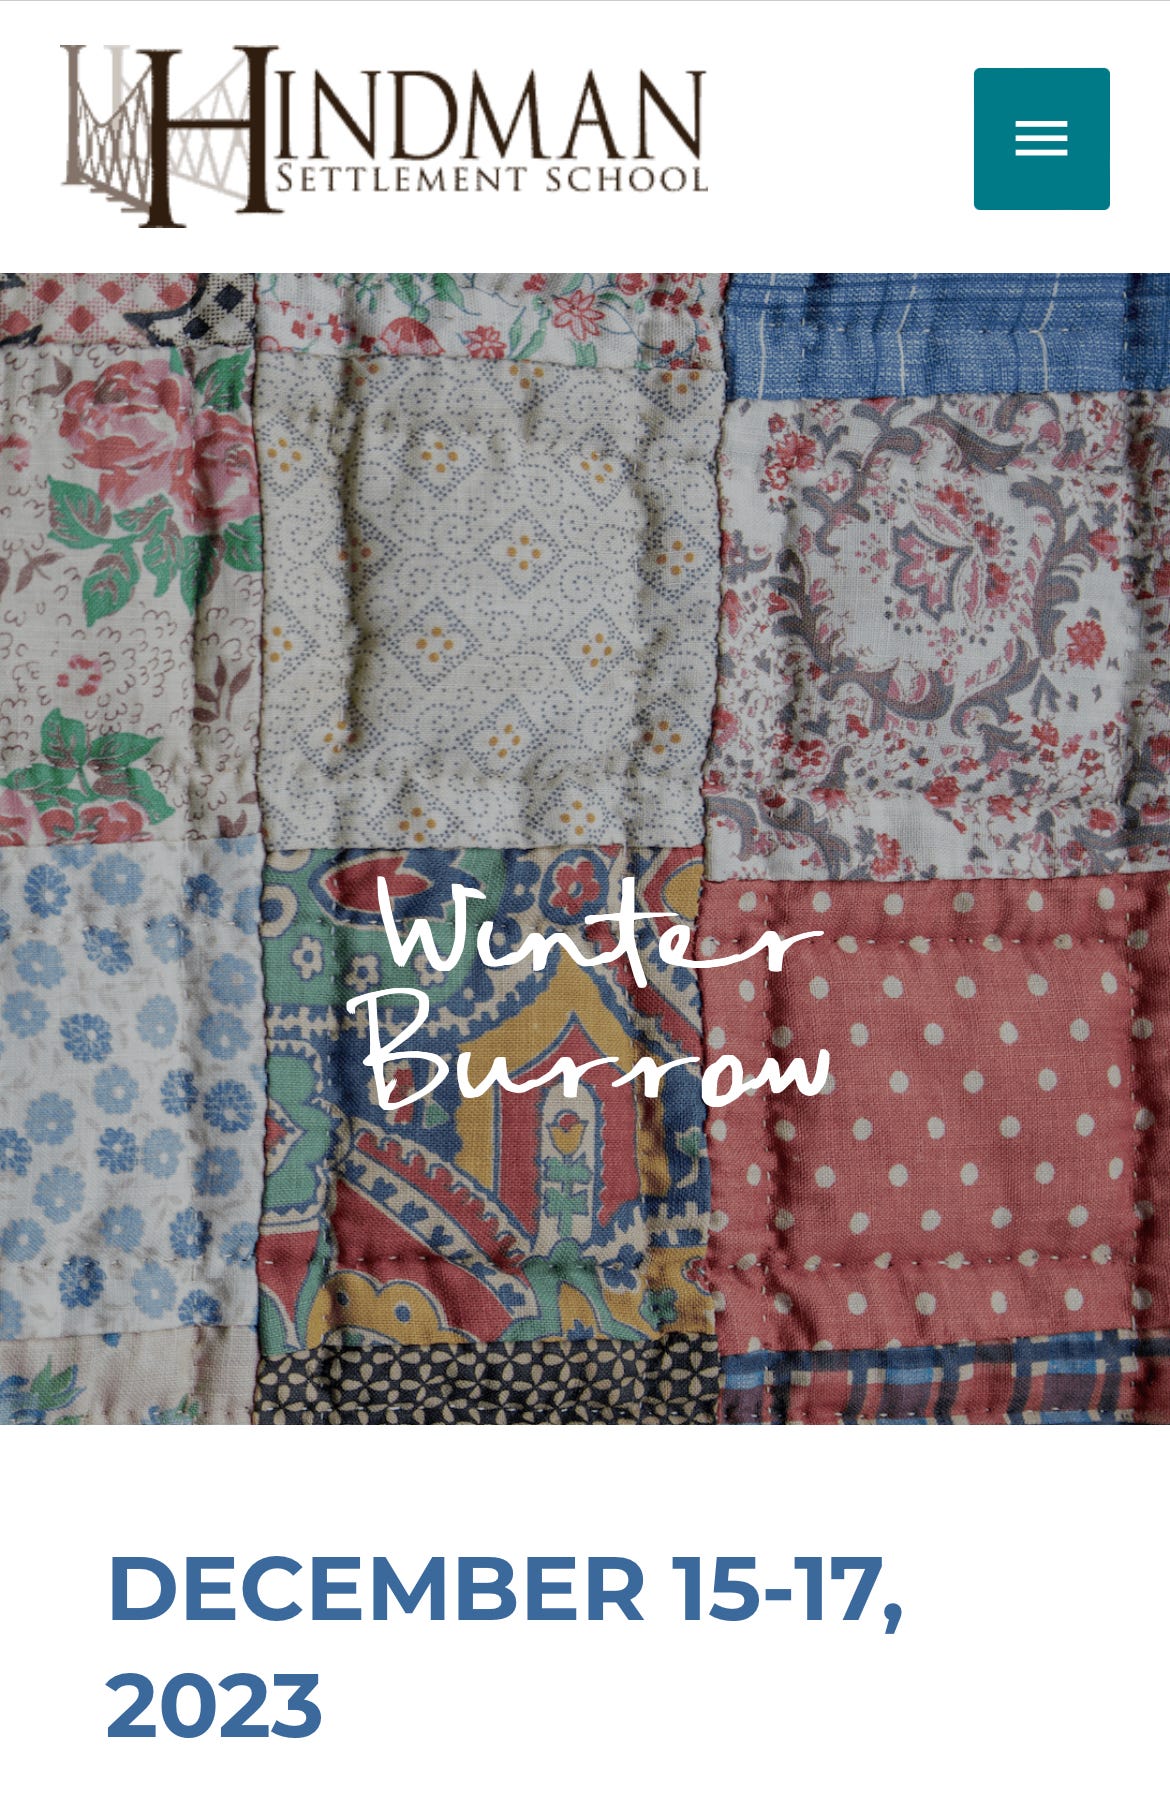 background of a quilt with the words Winter Burrow superimposed and the dates of the conference Dec 15-17, 2023